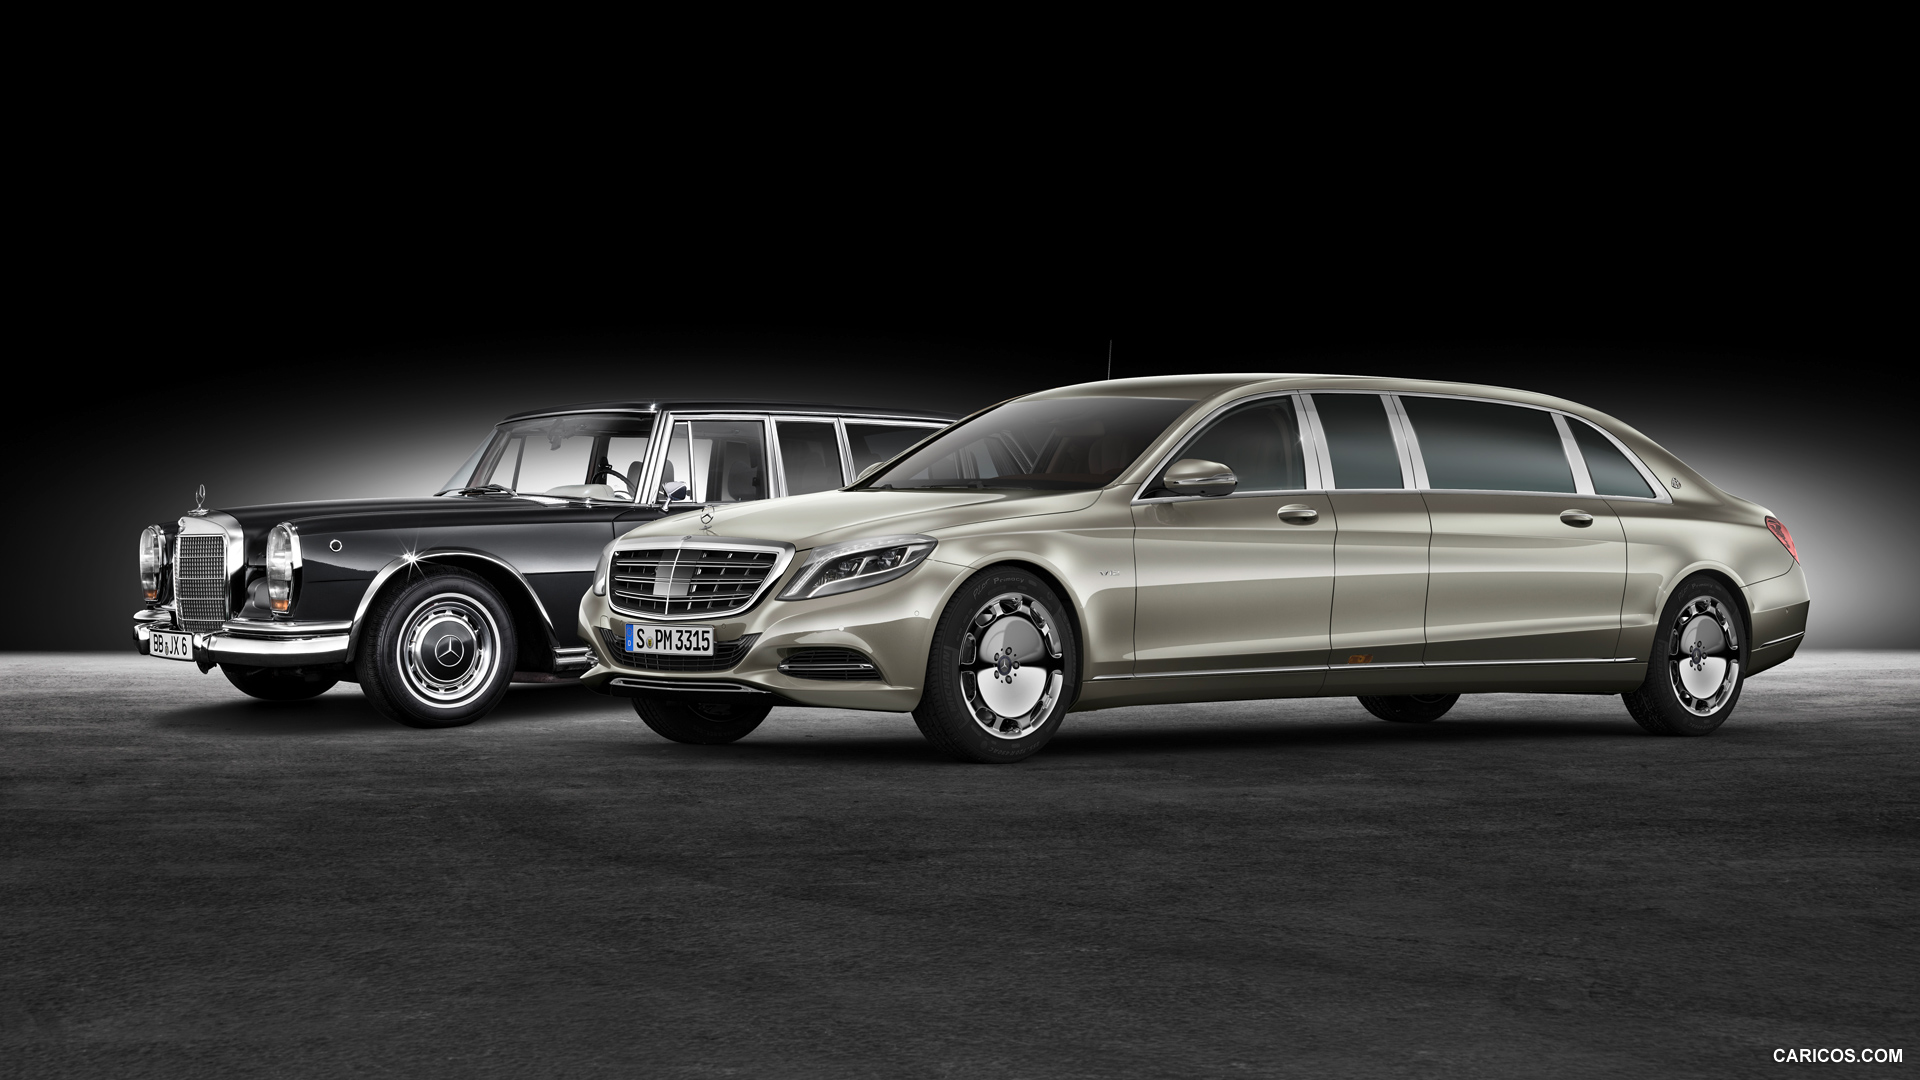 2016 Mercedes-Maybach S600 Pullman and Mercedes-Benz 600 Pullman - Side, #5 of 31